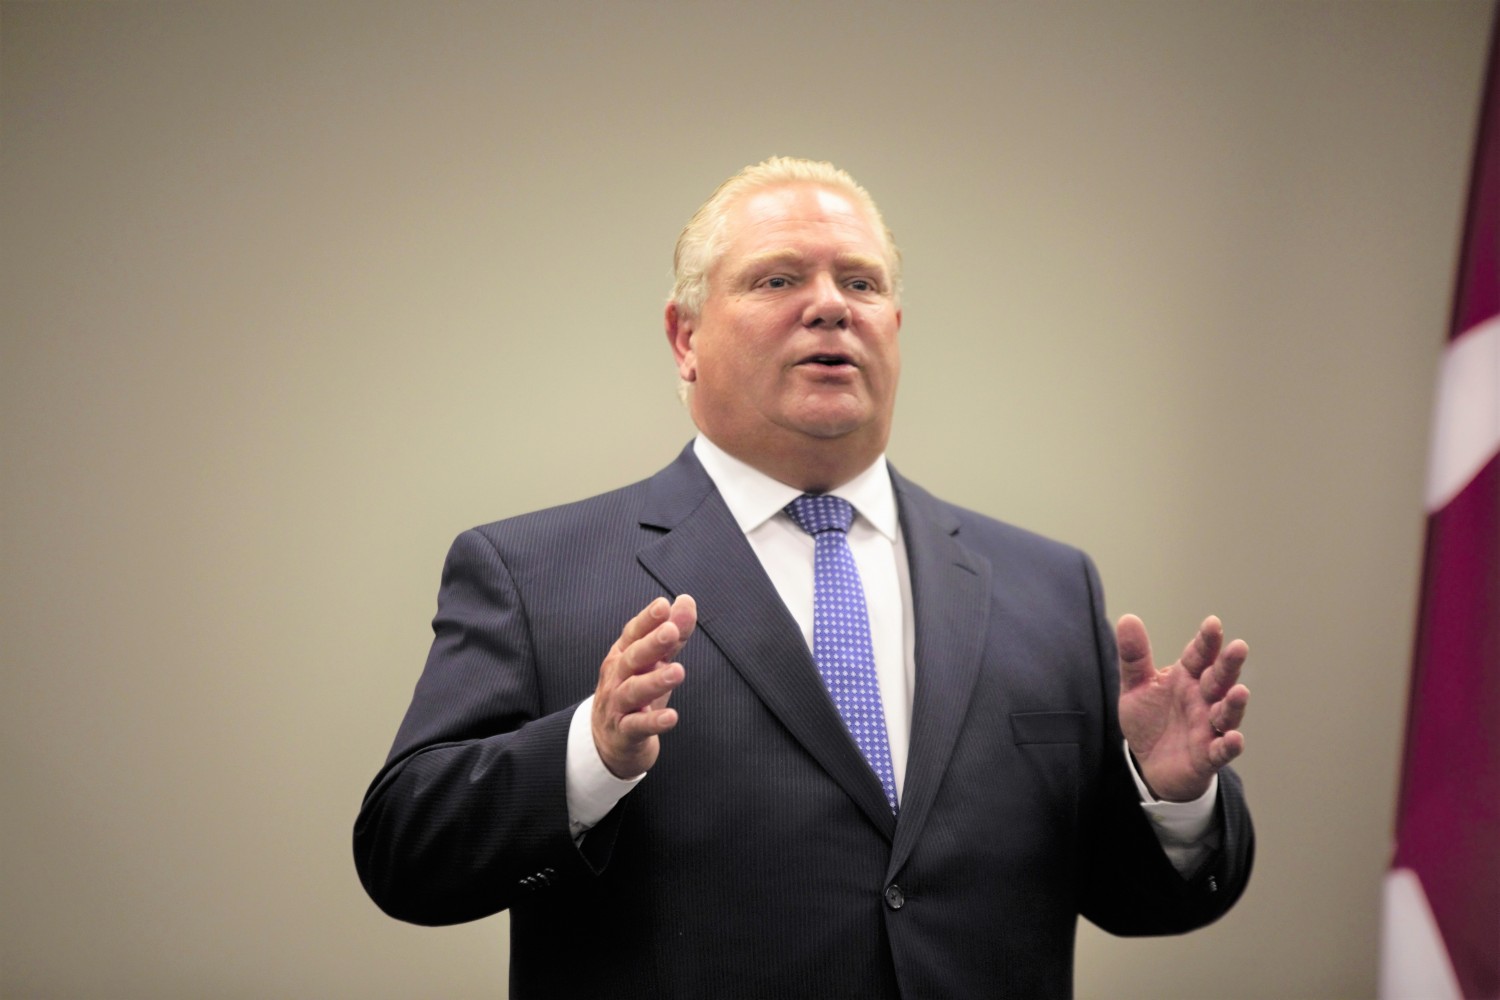 Ontario municipalities where the PCs get their power should fight Doug Ford